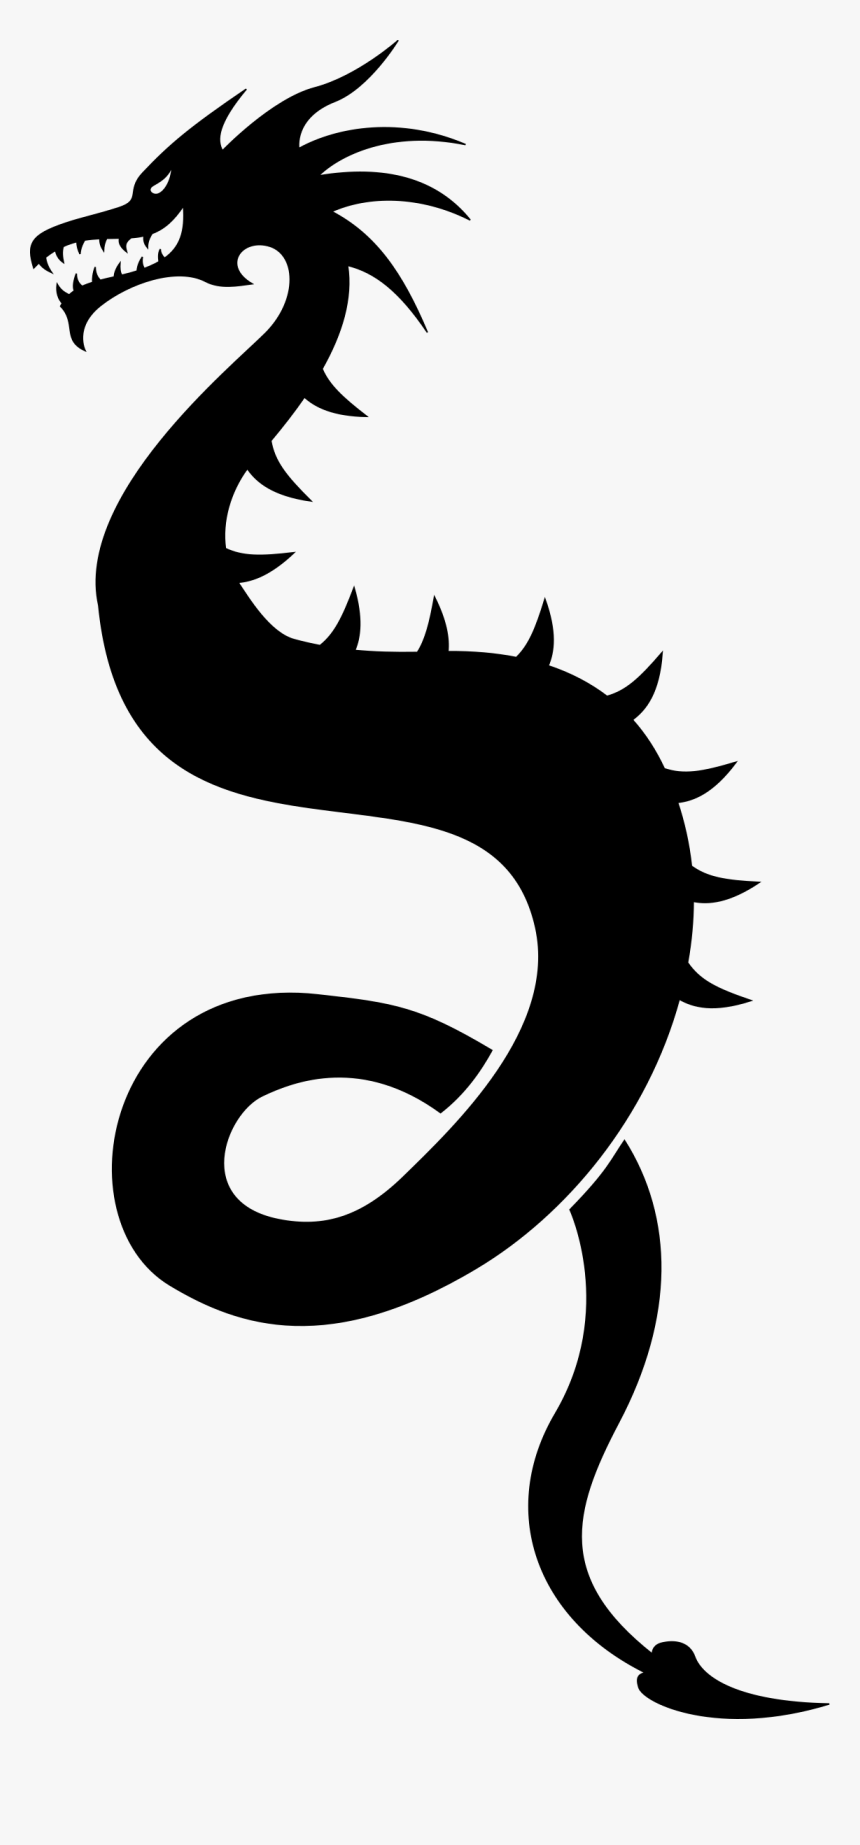 Dragon Silhouette By Kuba - Easy Chinese Dragon Silhouette, HD Png Download, Free Download